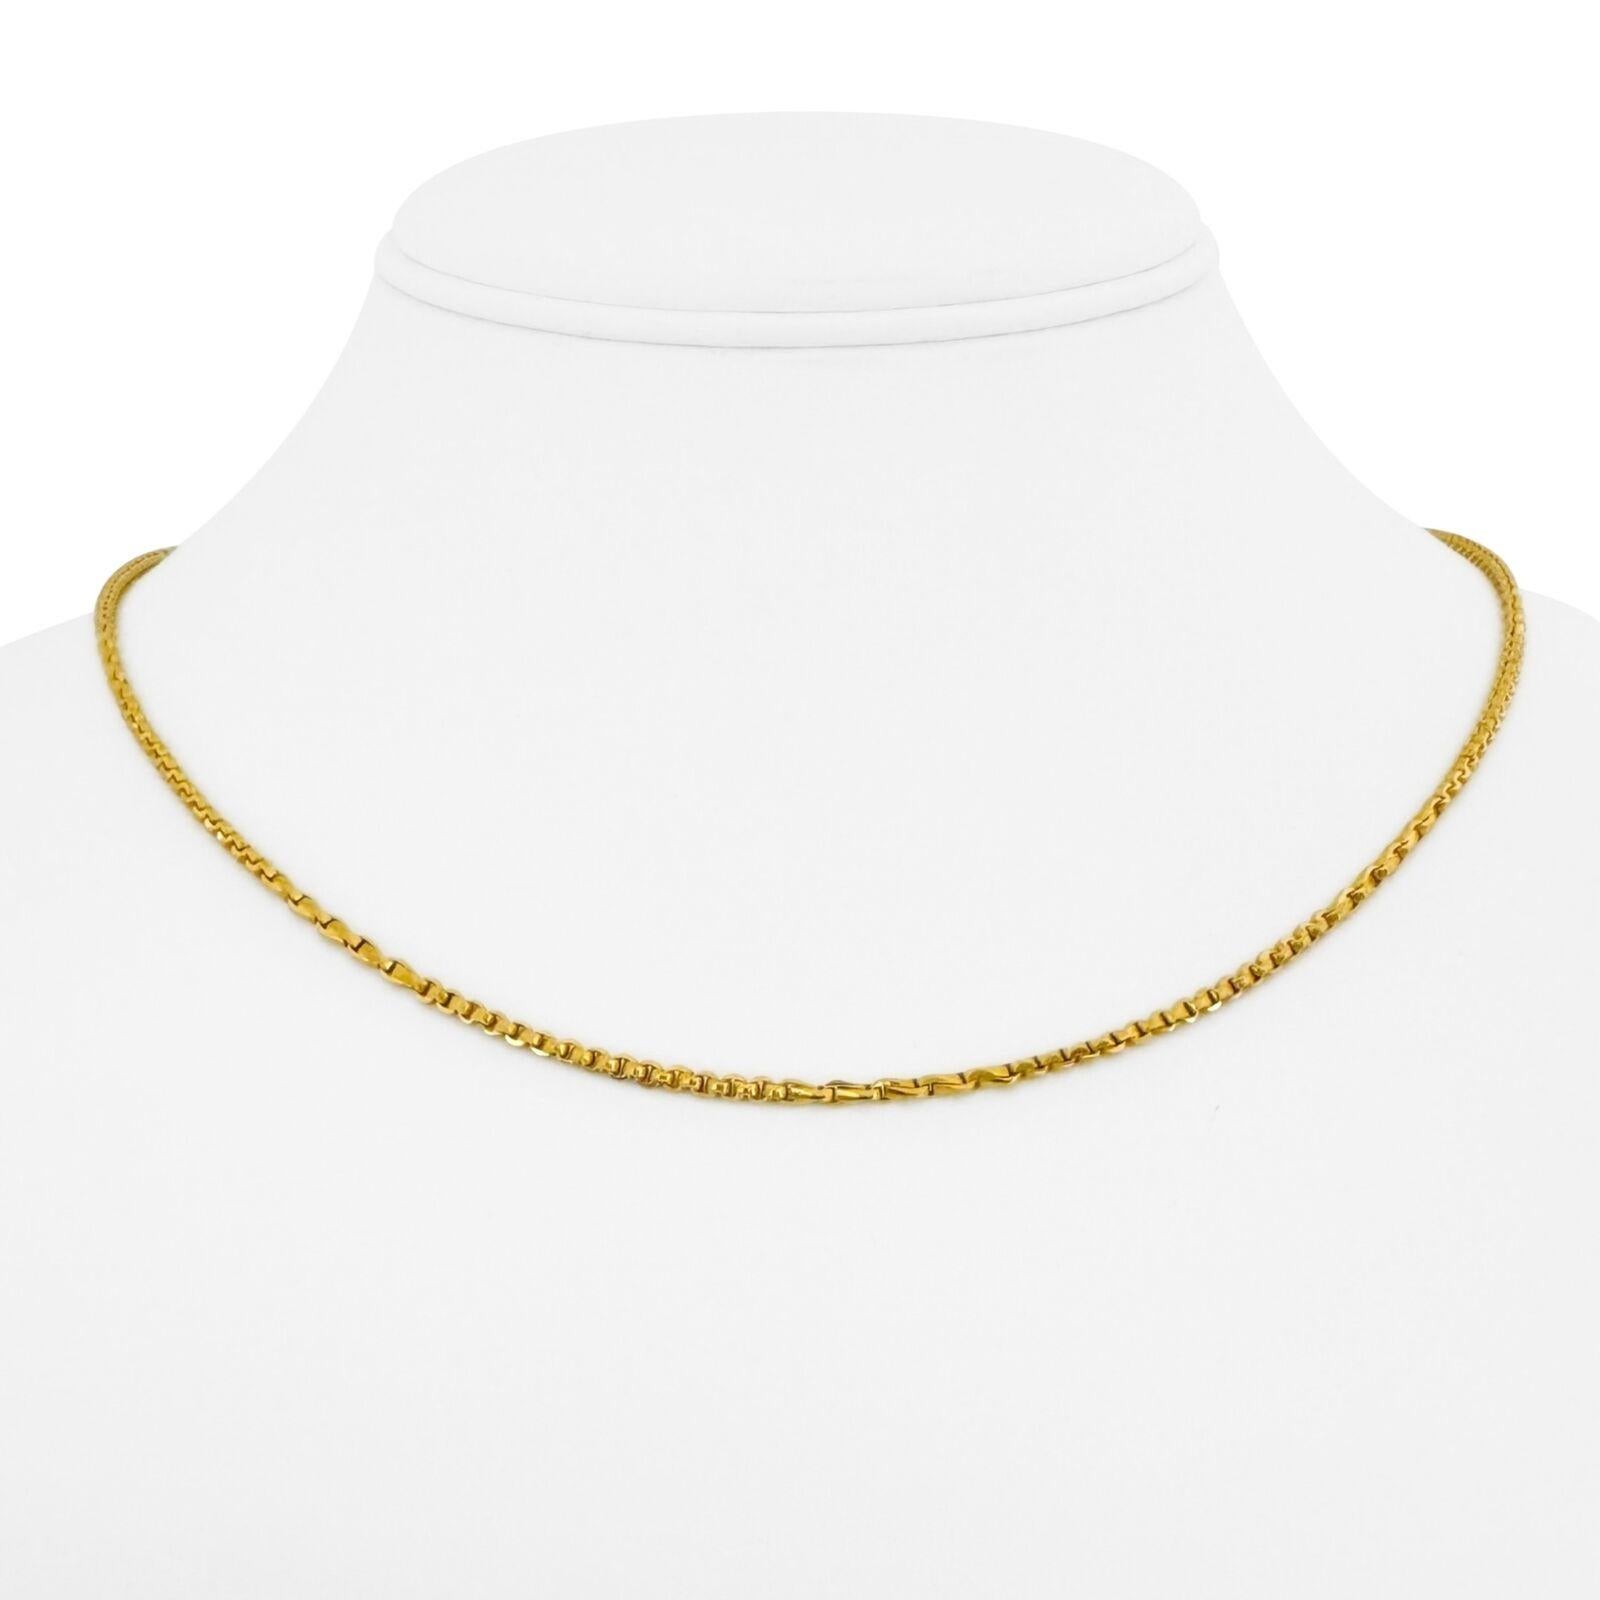 22 Karat Yellow Gold Solid Thin Fancy Cable Link Chain Necklace  4